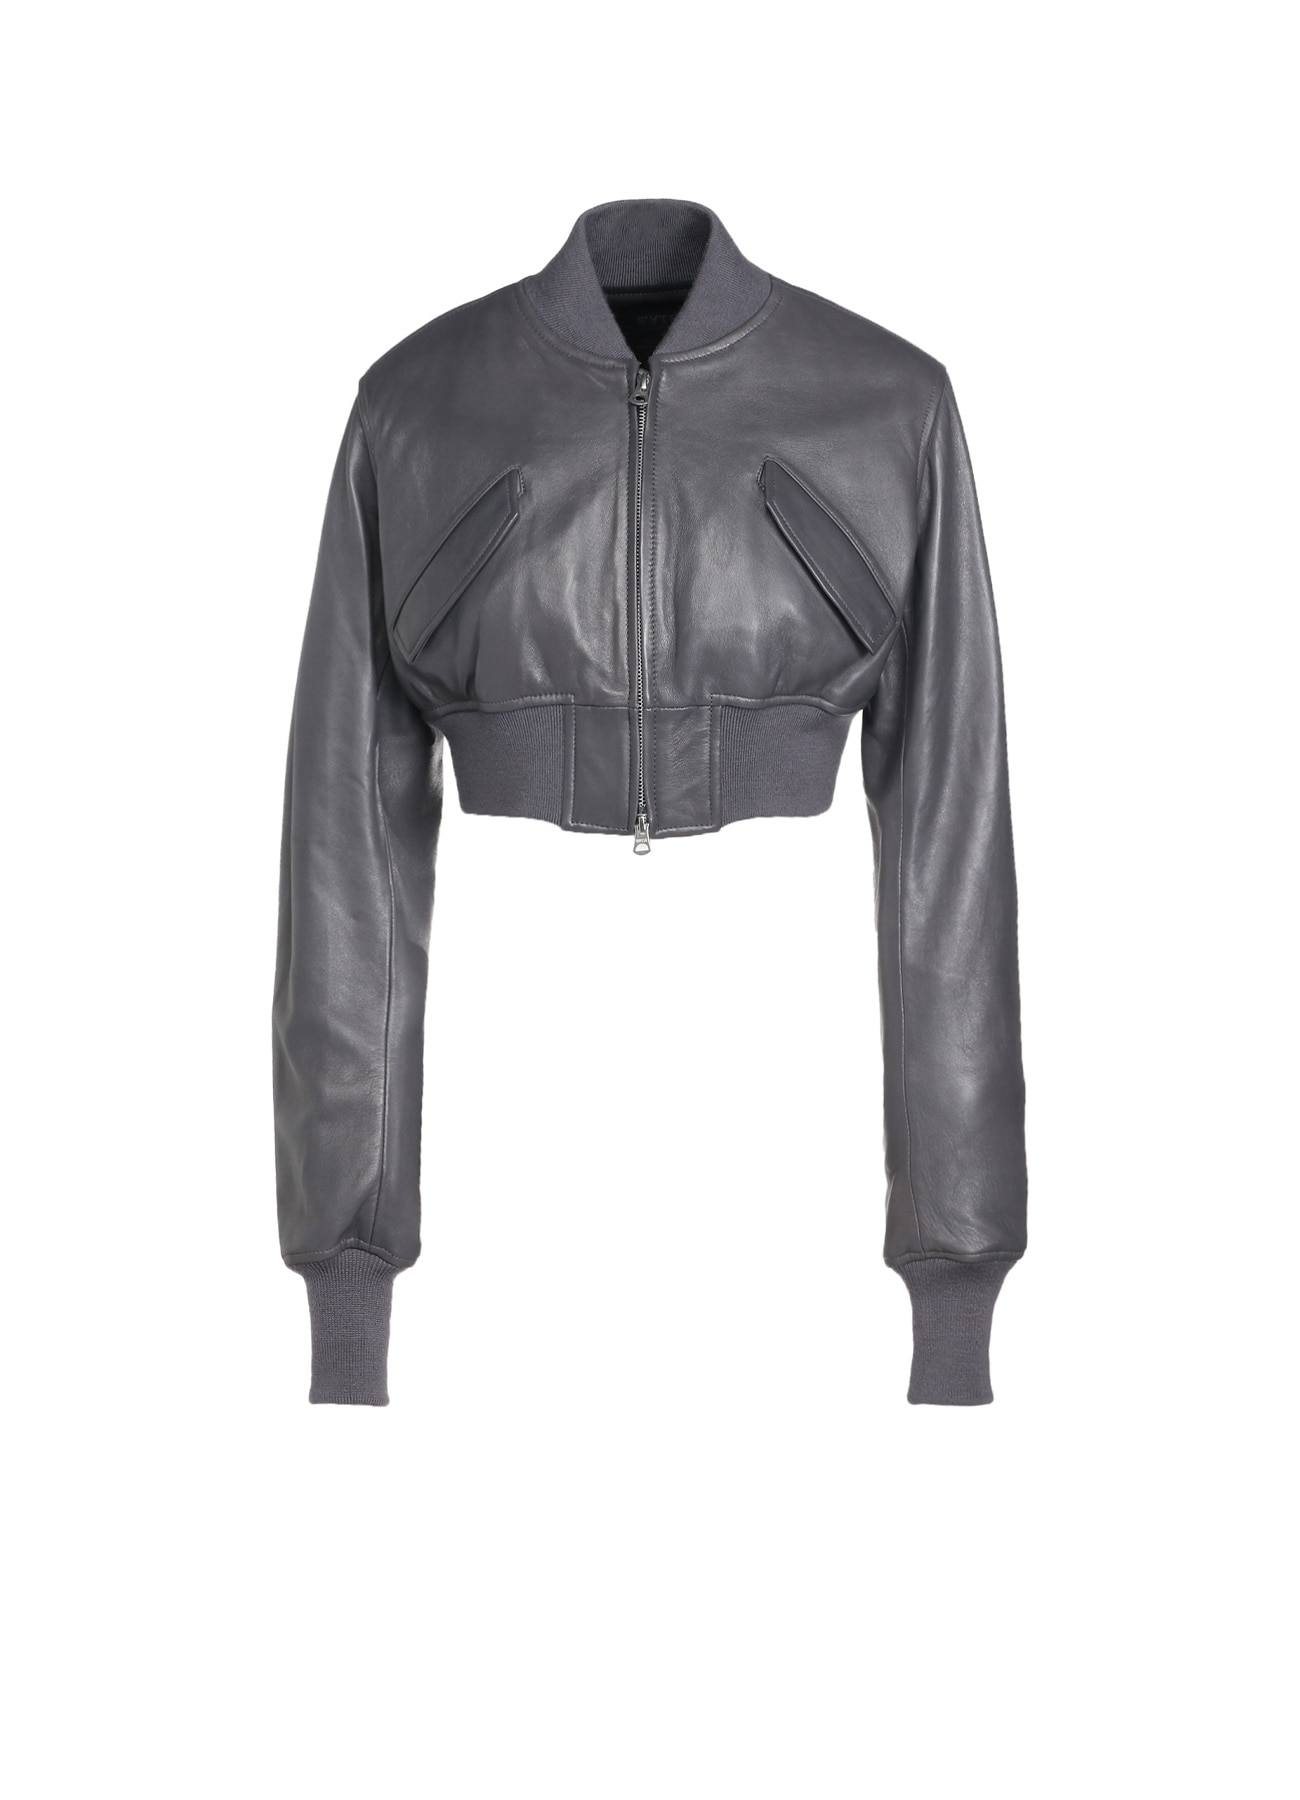 SEMI-VEGETABLE TANNED SHEEP LEATHER CROPPED BOMBER JACKET